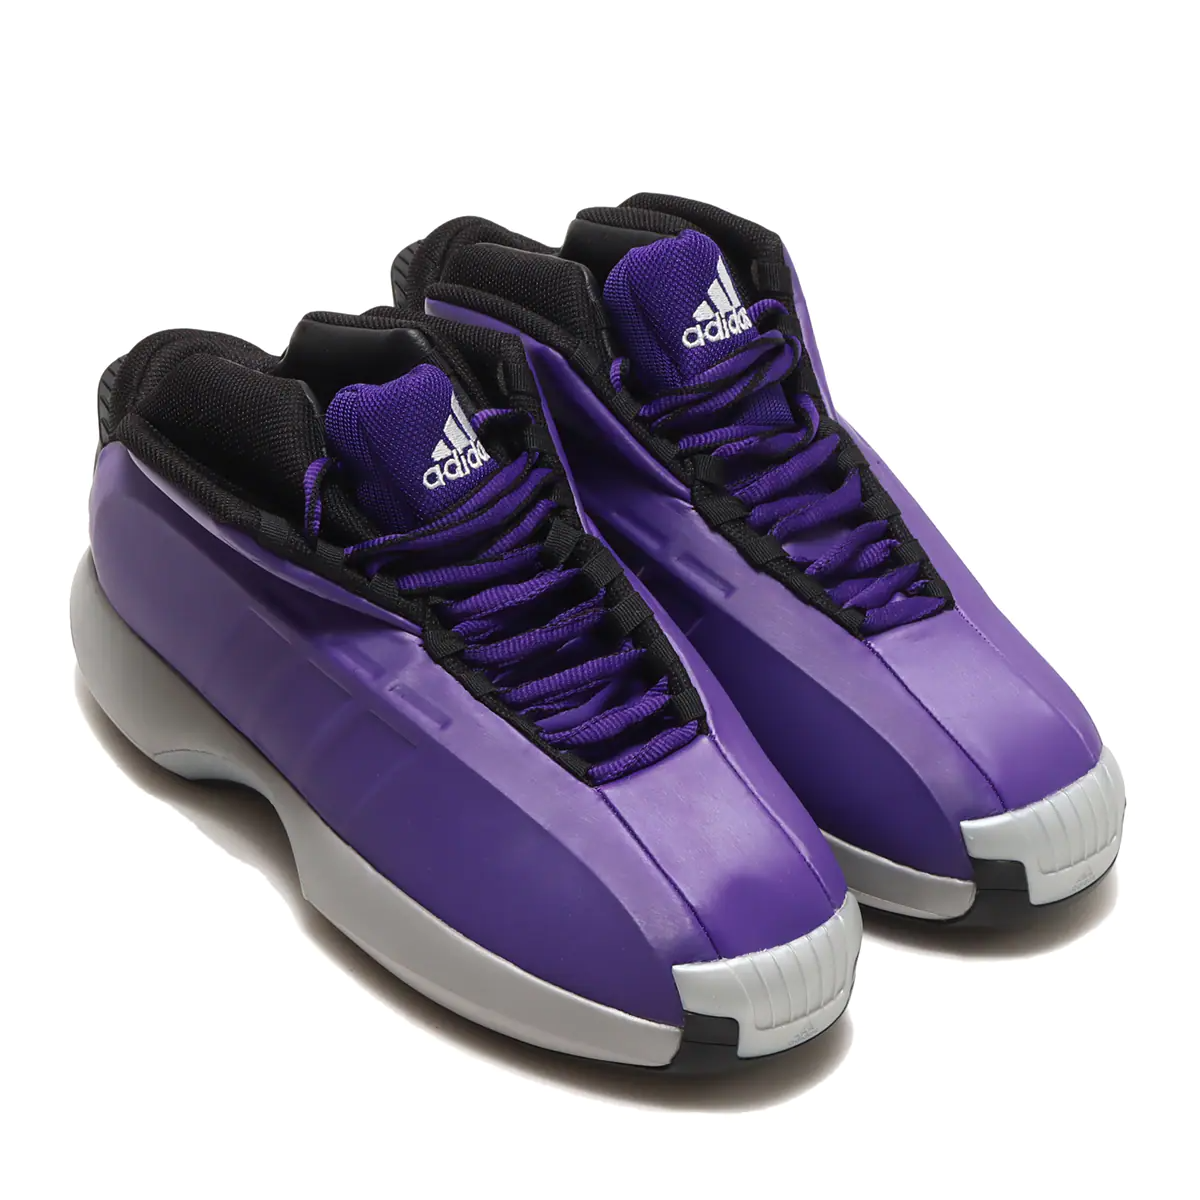 Now Available: adidas Crazy 1 